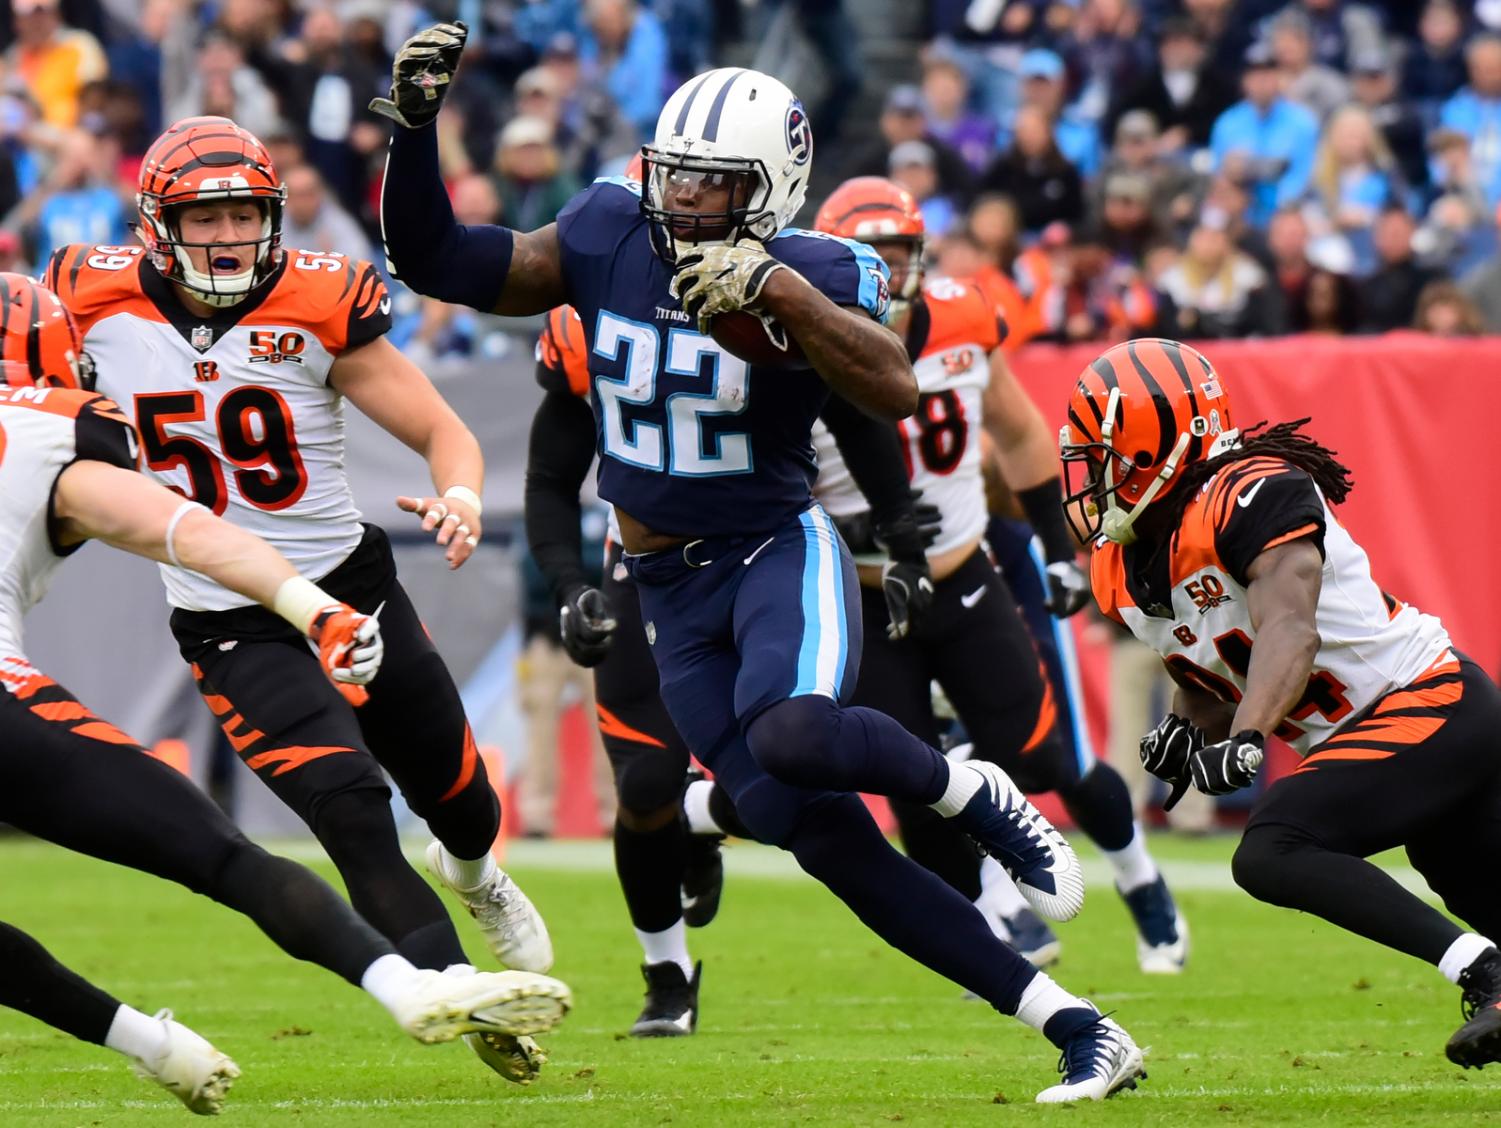 Touchdown+Titans%21+The+NFL+marks+20+years+in+Tennessee